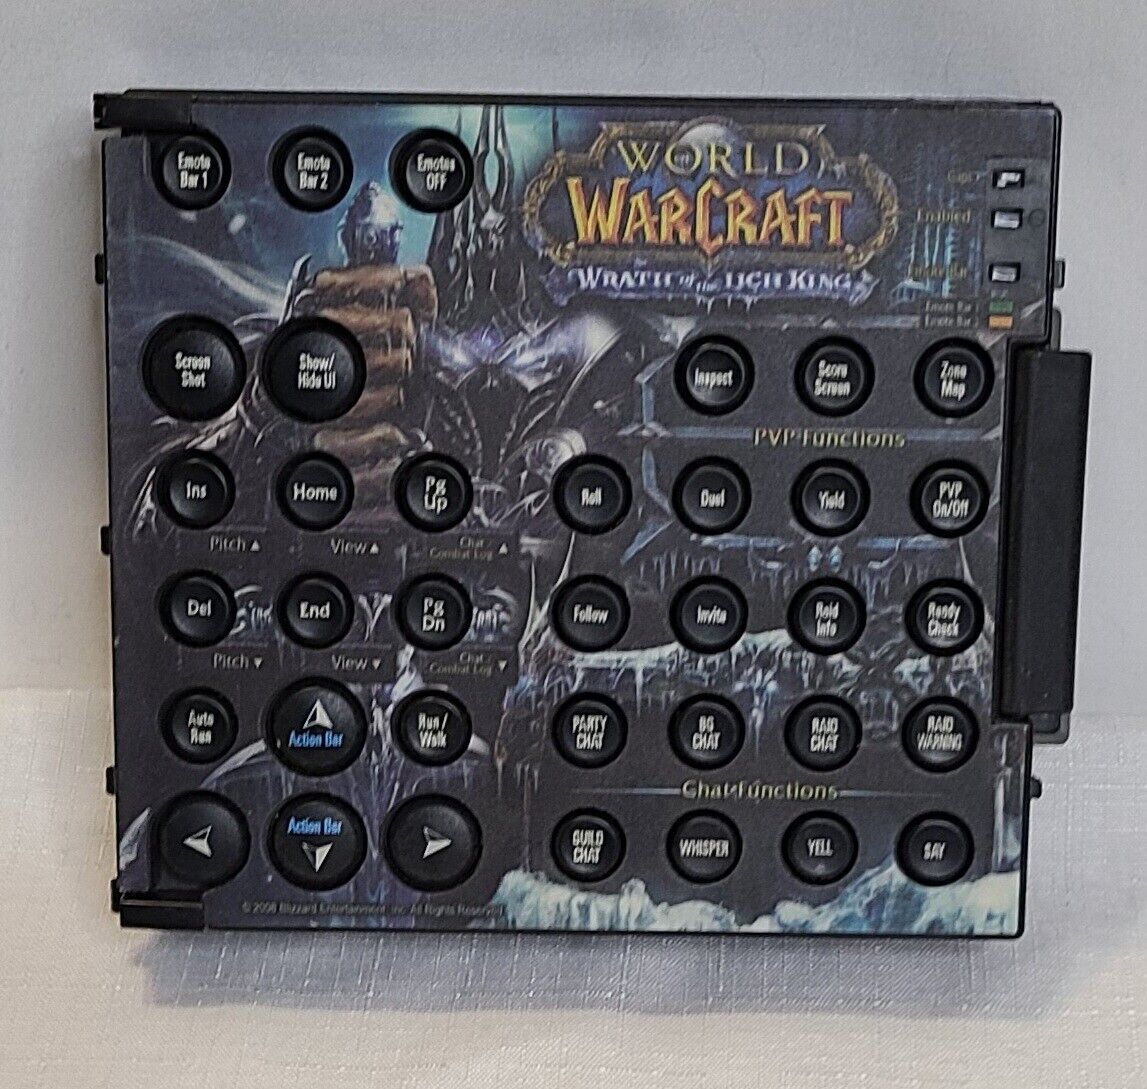 Ideazon Zboard Keyboard Overlay World of Warcraft Wrath of the Lich King